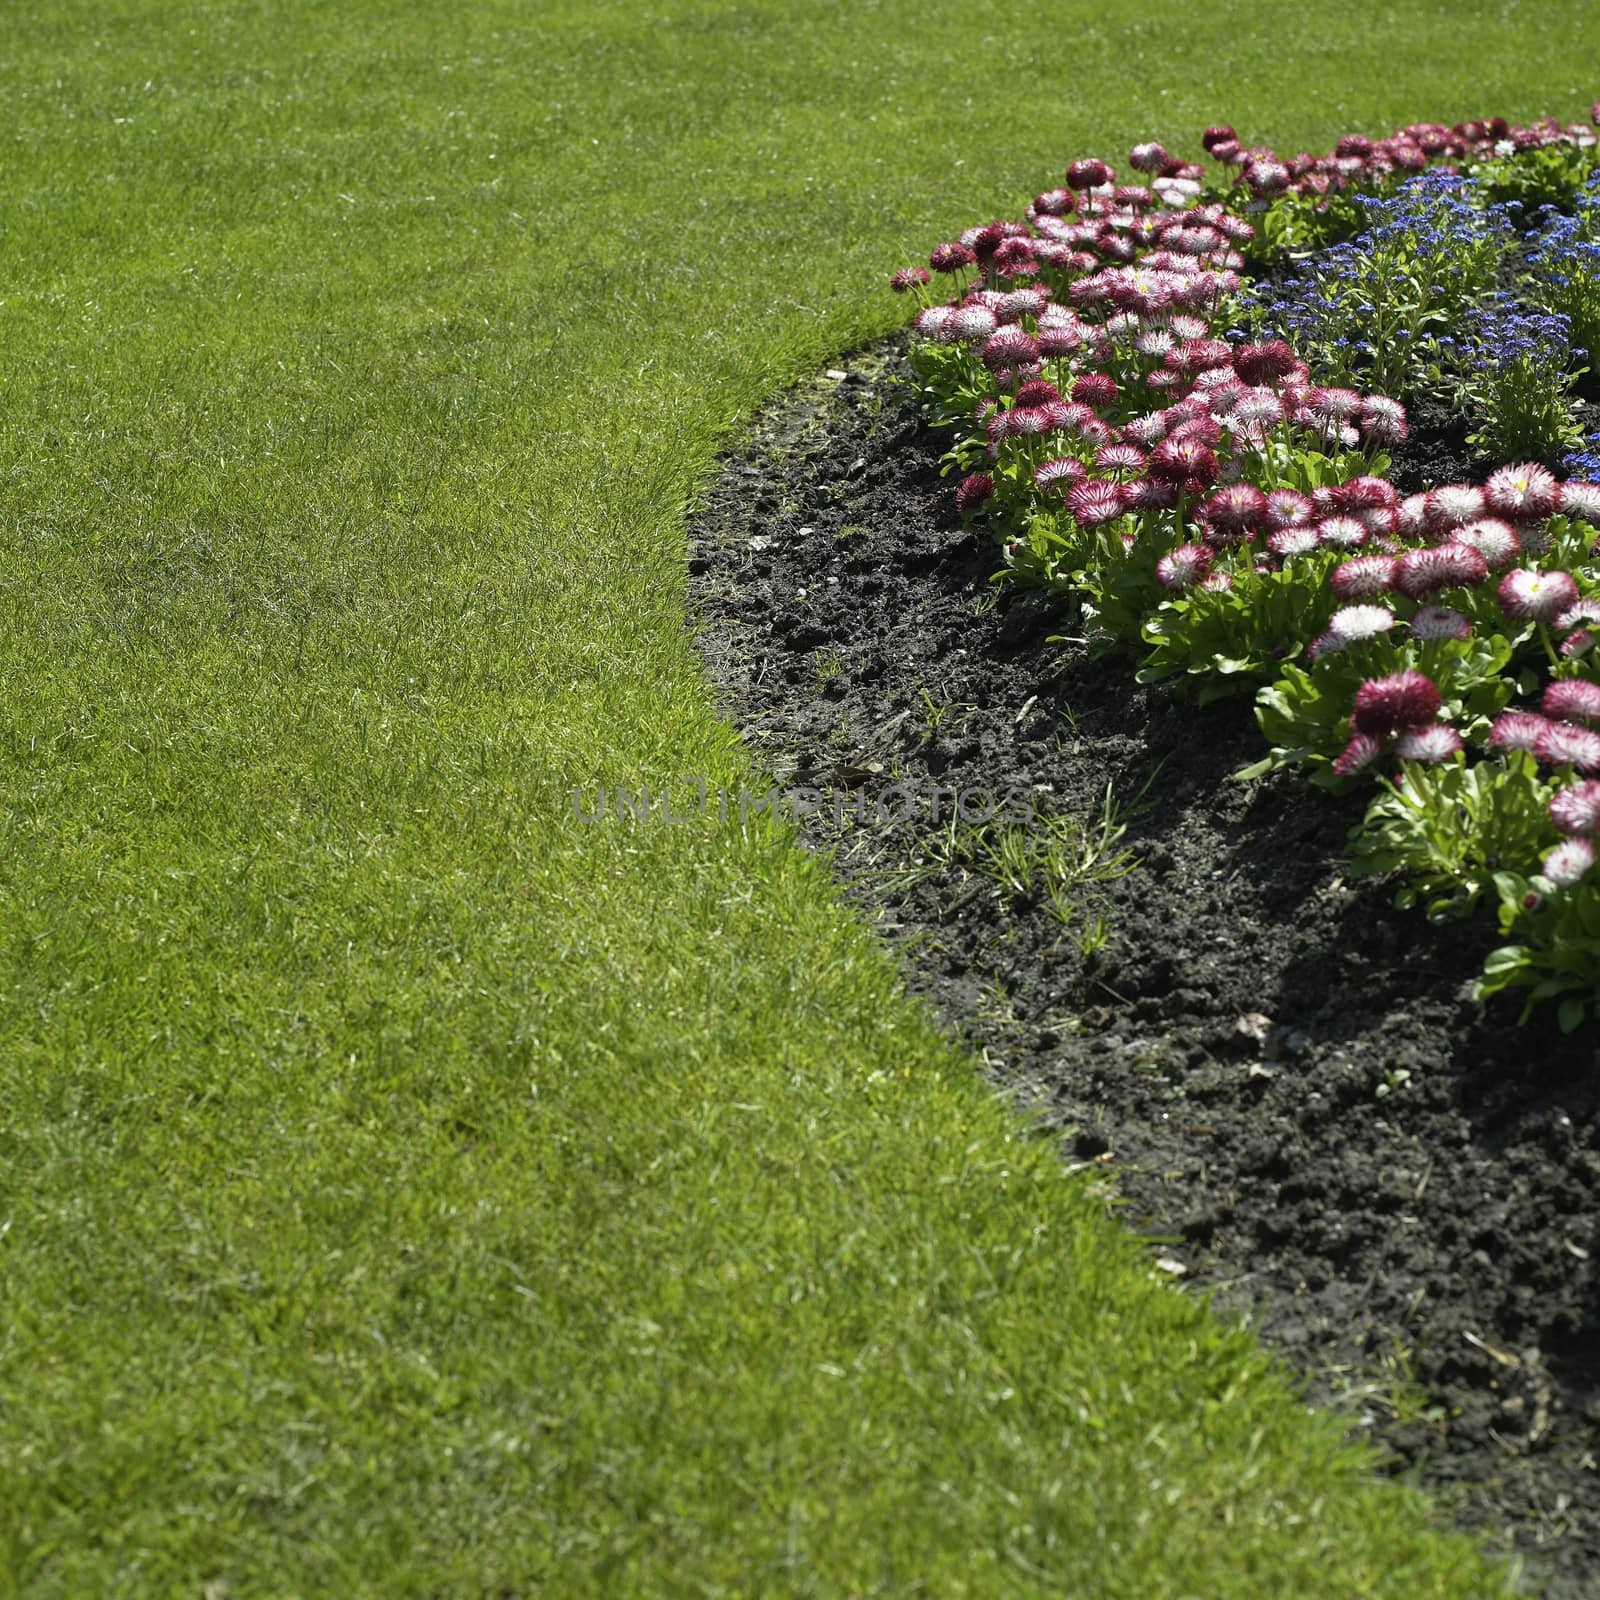 Trimmed lawn of perfect green grass surrounding a colorful flower bed